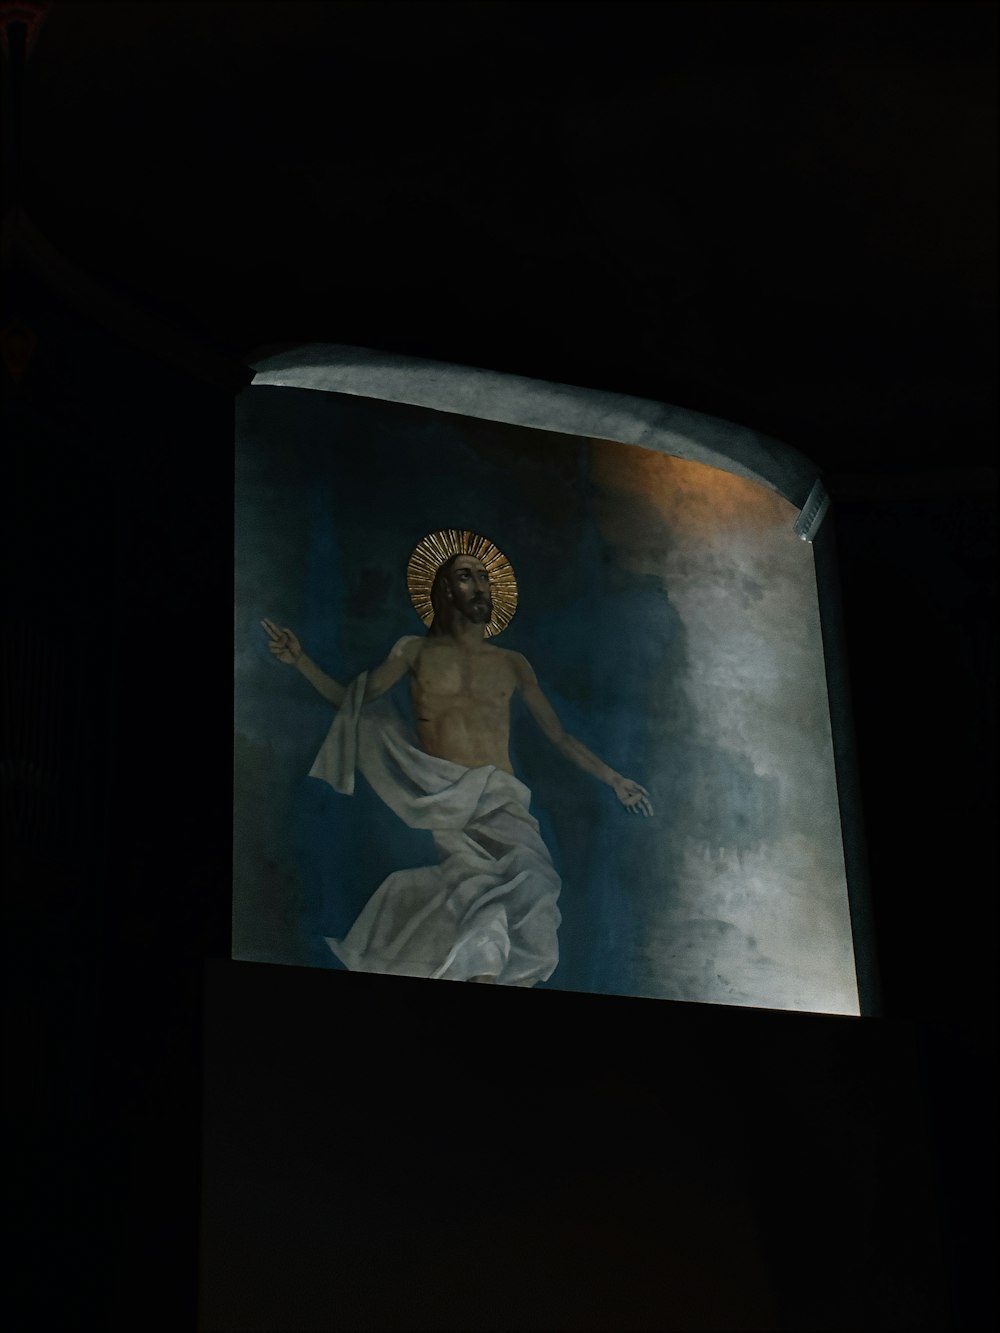 a painting of jesus on a wall in a dark room